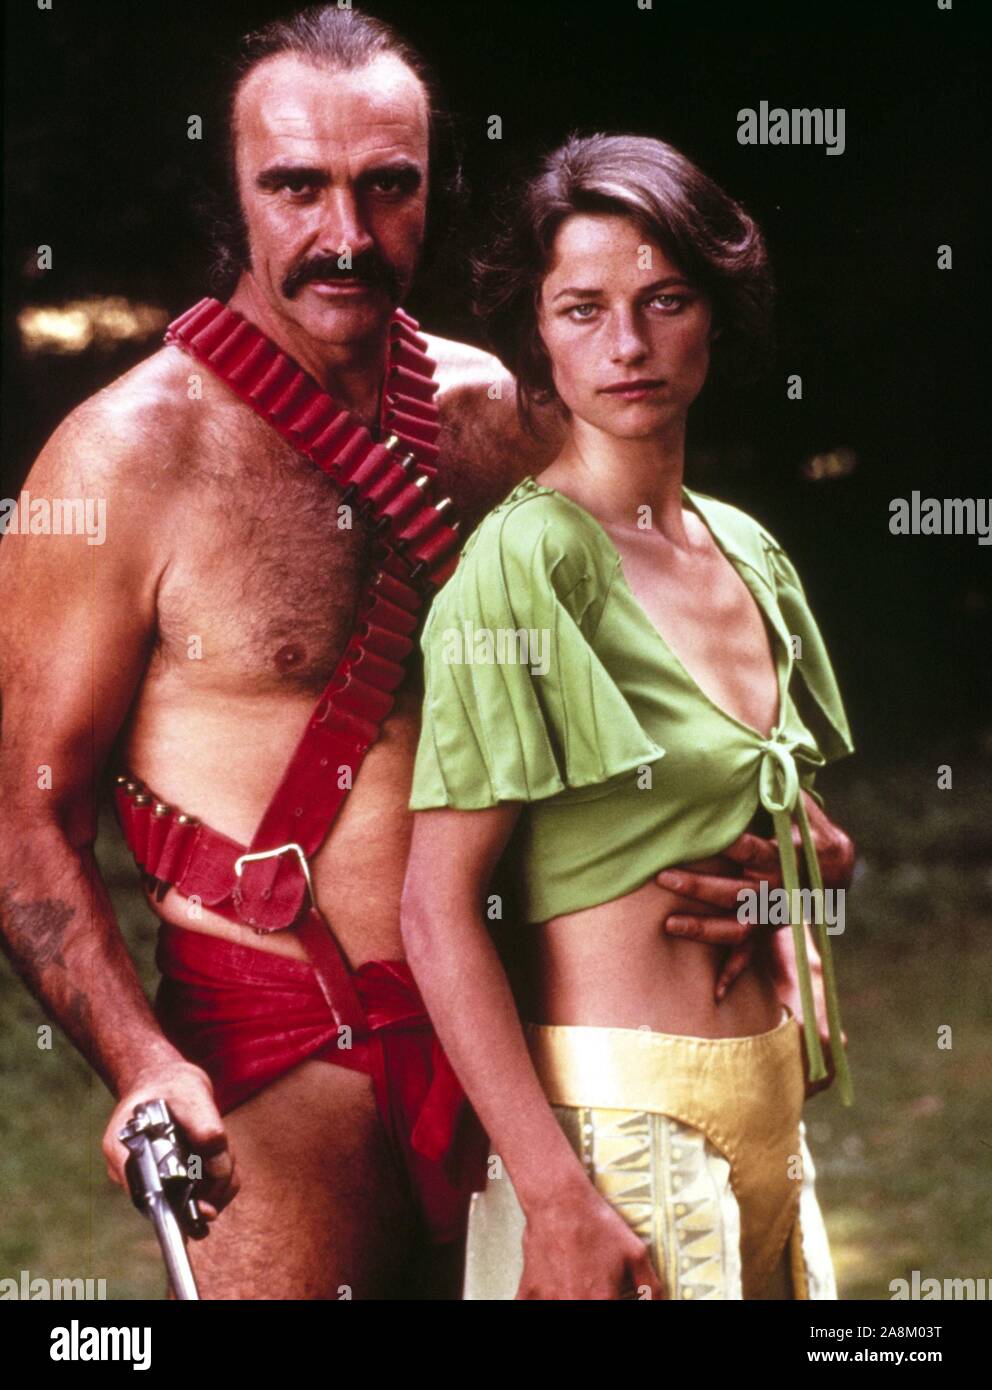 SEAN CONNERY and CHARLOTTE RAMPLING in ZARDOZ (1974), directed by JOHN BOORMAN. Credit: 20TH CENTURY FOX / Album Stock Photo